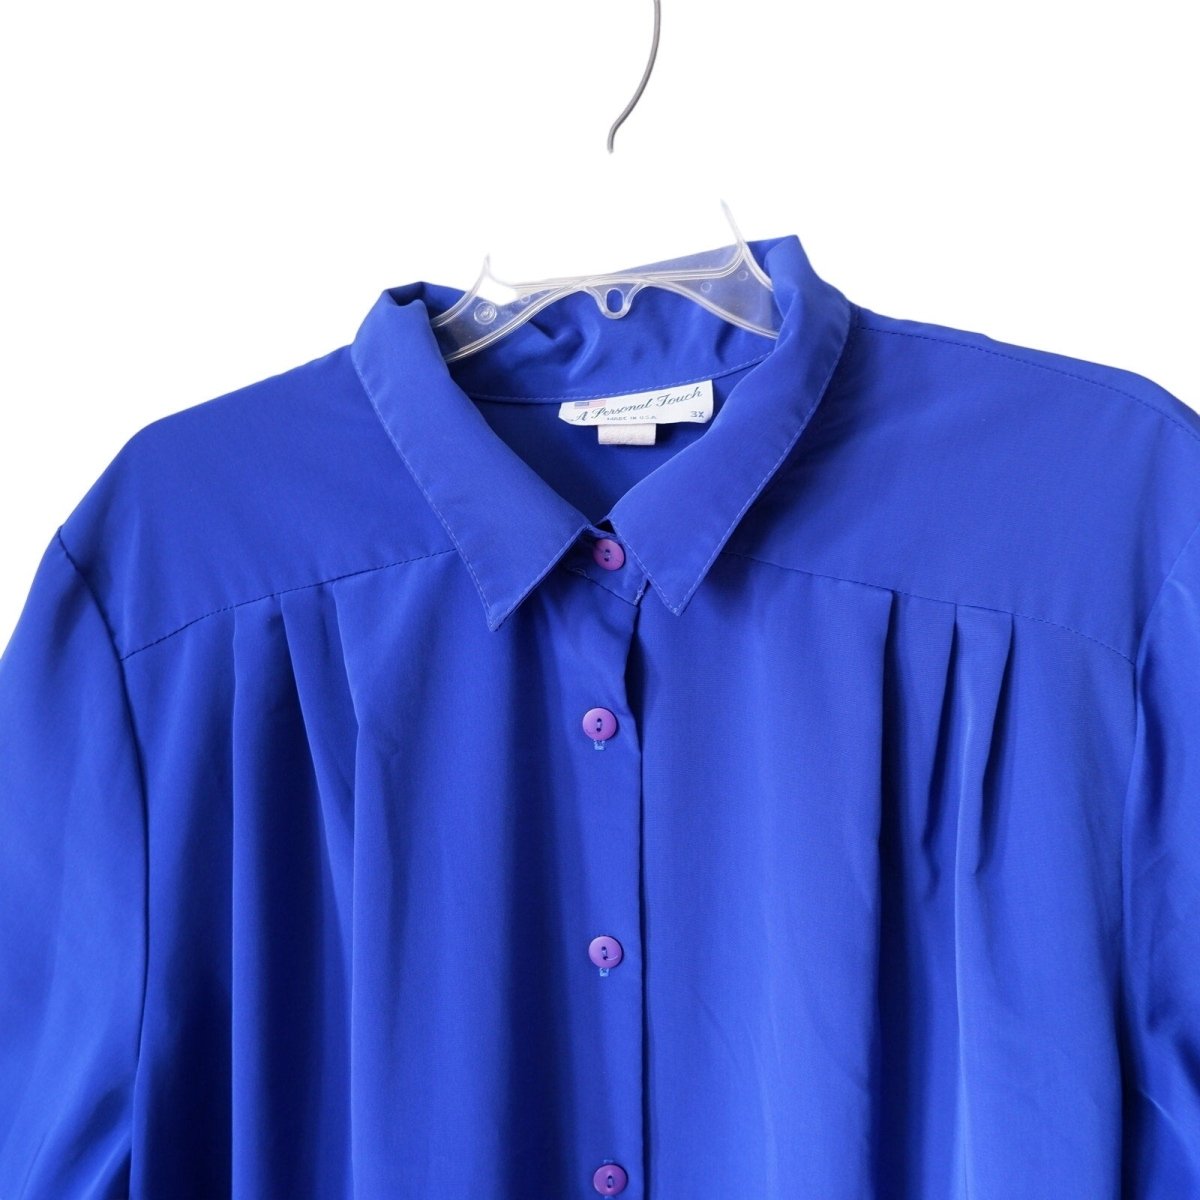 Vintage 80s/90s Royal Blue Blouse Size 3X Women - themallvintage The Mall Vintage 1980s 1990s Capsule